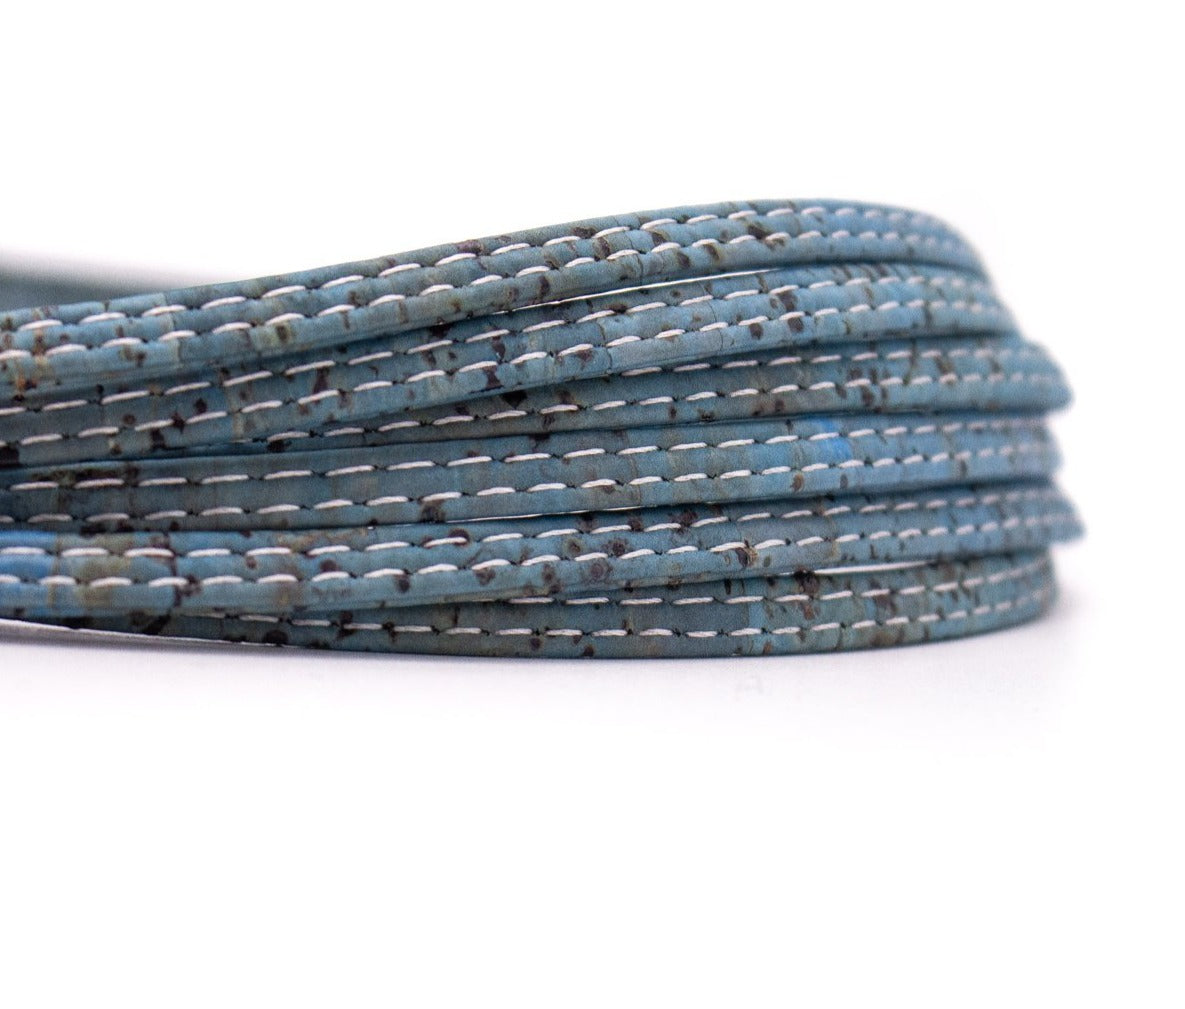 10 meters of Turquoise Color 5mm Flat Natural Cork Cord COR-517